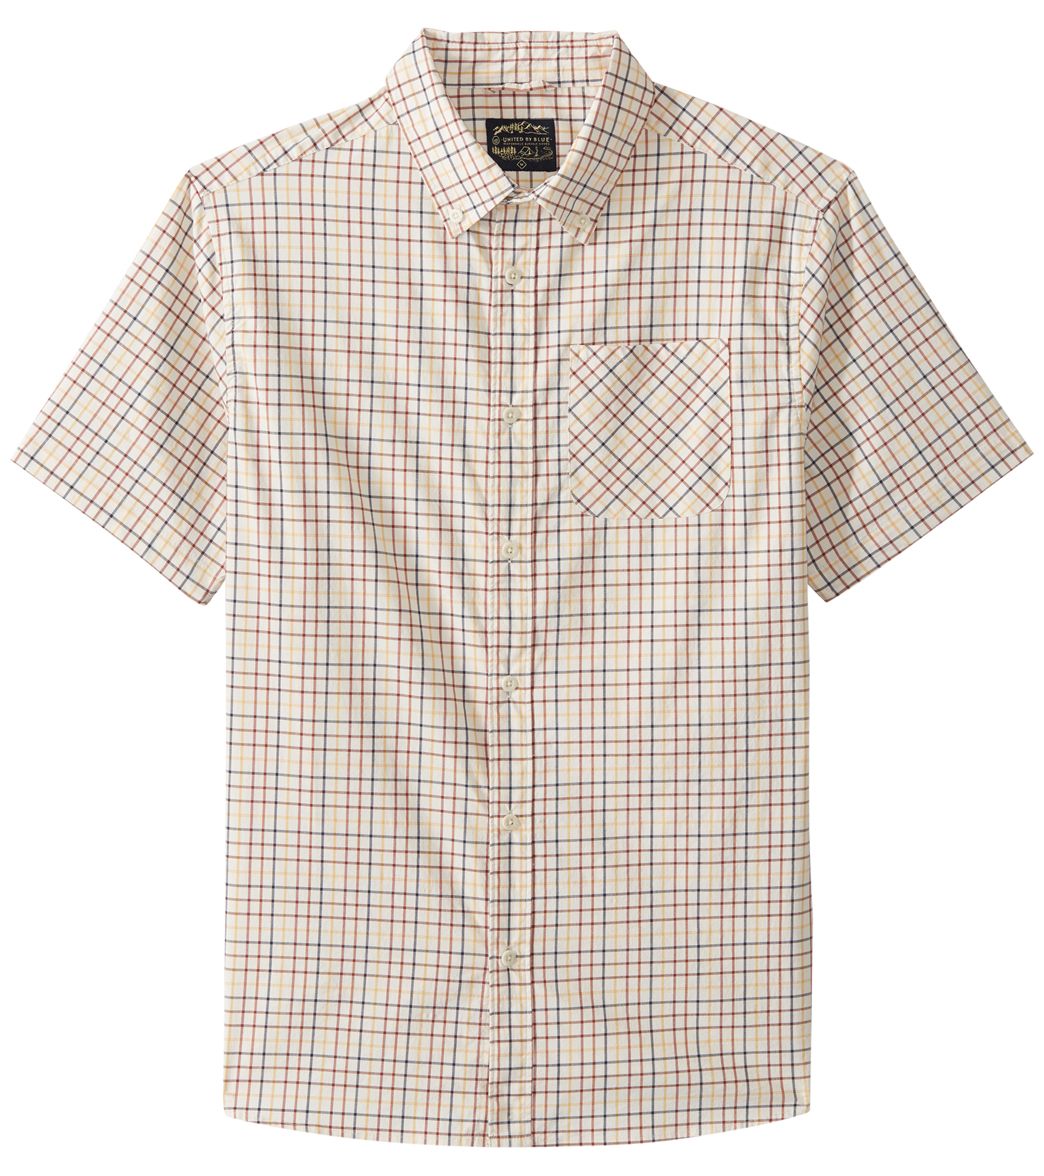 United By Blue Men's Clydebank Plaid Button Down Shirt - Tan Large Cotton/Polyester - Swimoutlet.com